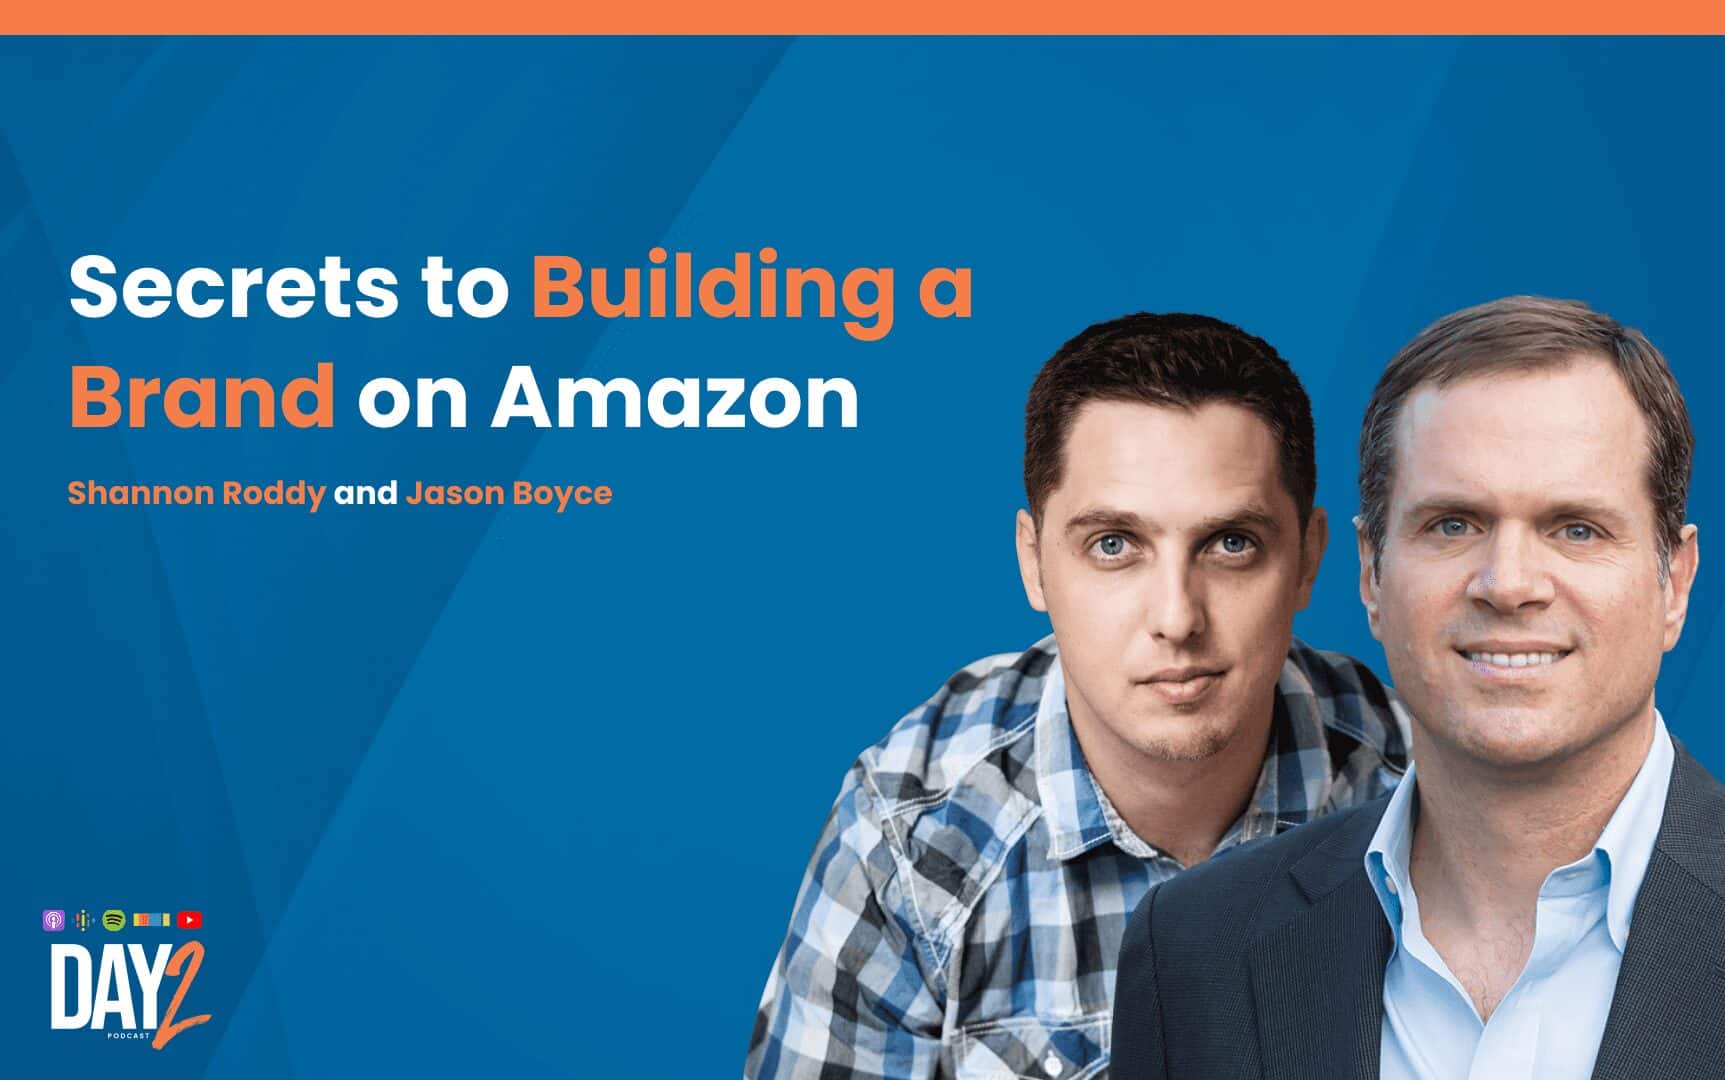 How to build a brand on Amazon